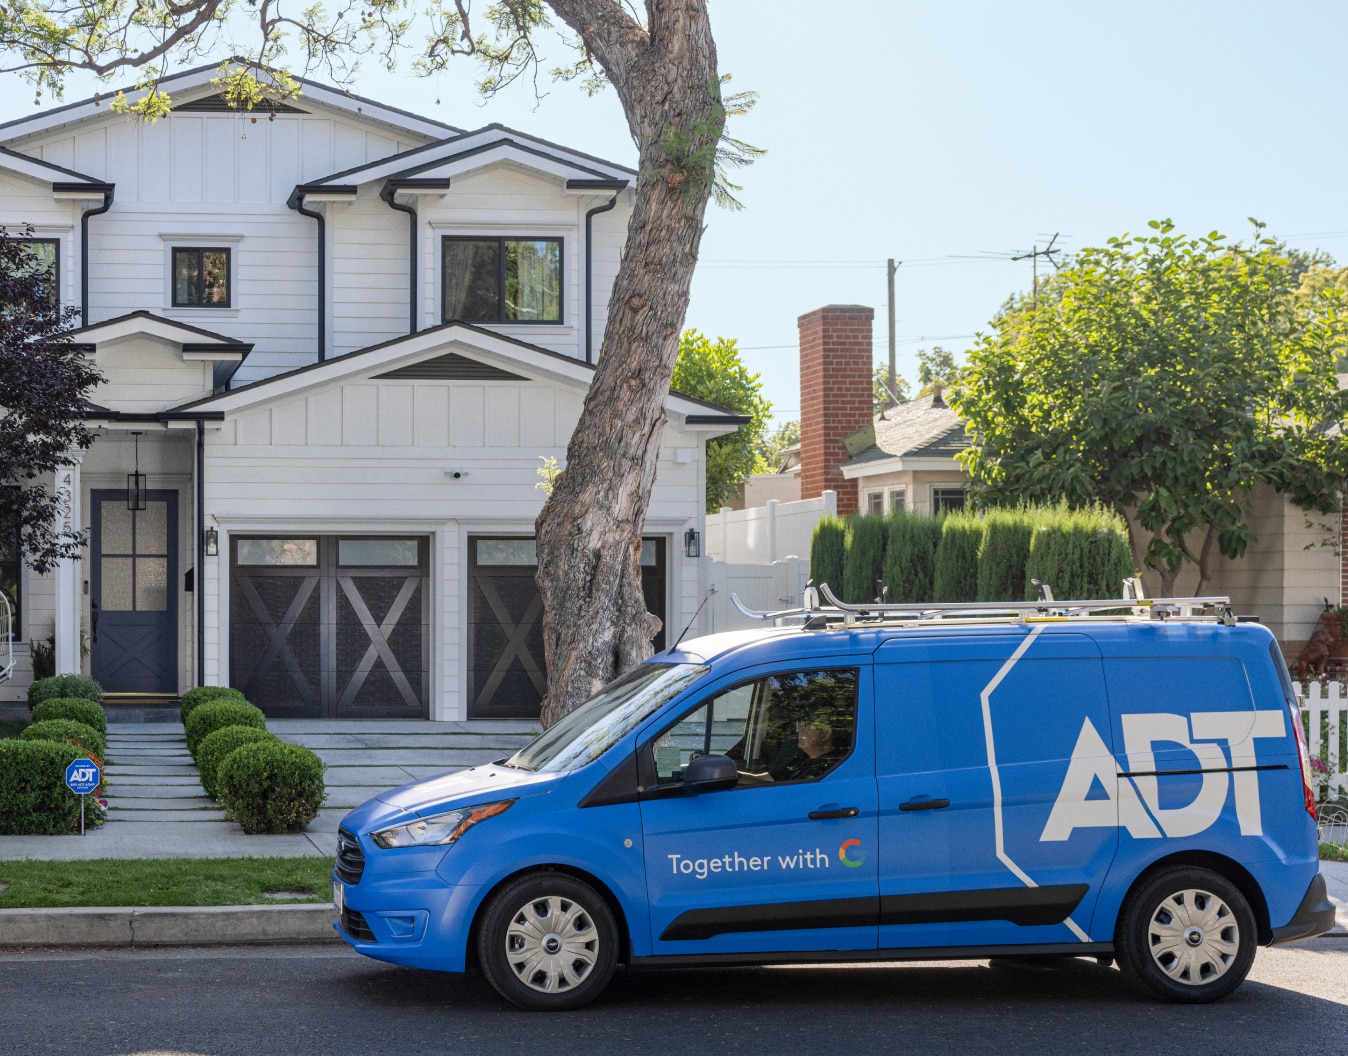 ADT van outside of someone's house